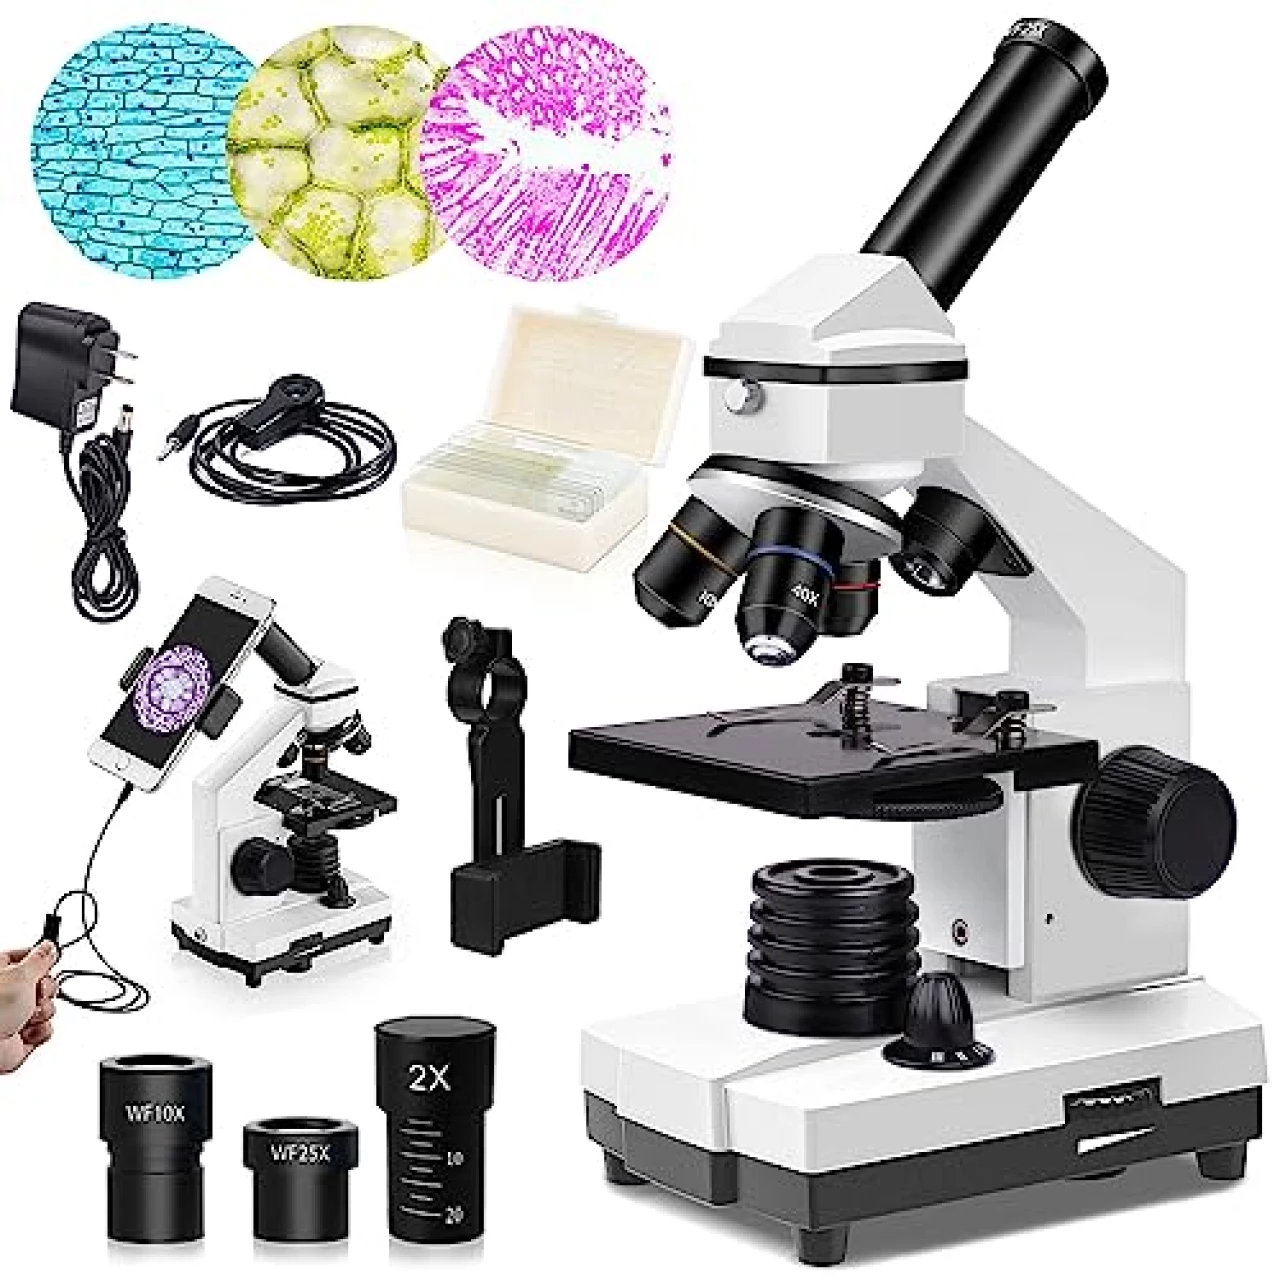 PalliPartners Powerful Biological Microscopes for School Laboratory Home Education,100X-2000X Microscopes for Kids Students Adults, with Microscope Slides Set, Phone Adapter, White (SWXWJ-1)